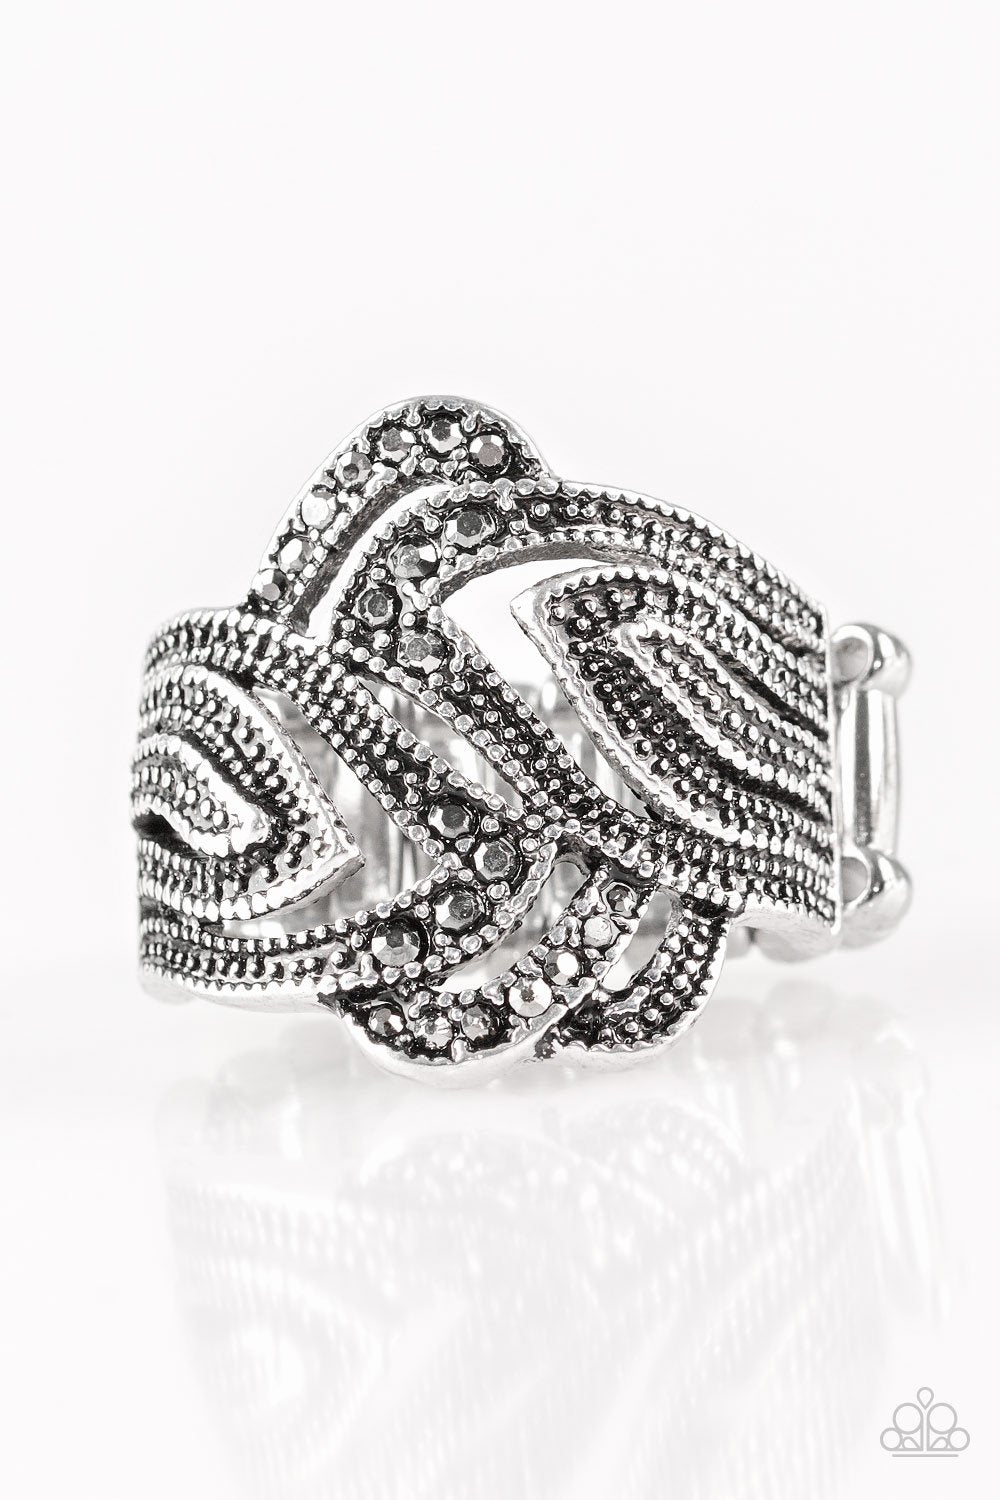 Fire and Ice Silver Rhinestone Ring - Paparazzi Accessories - lightbox -CarasShop.com - $5 Jewelry by Cara Jewels